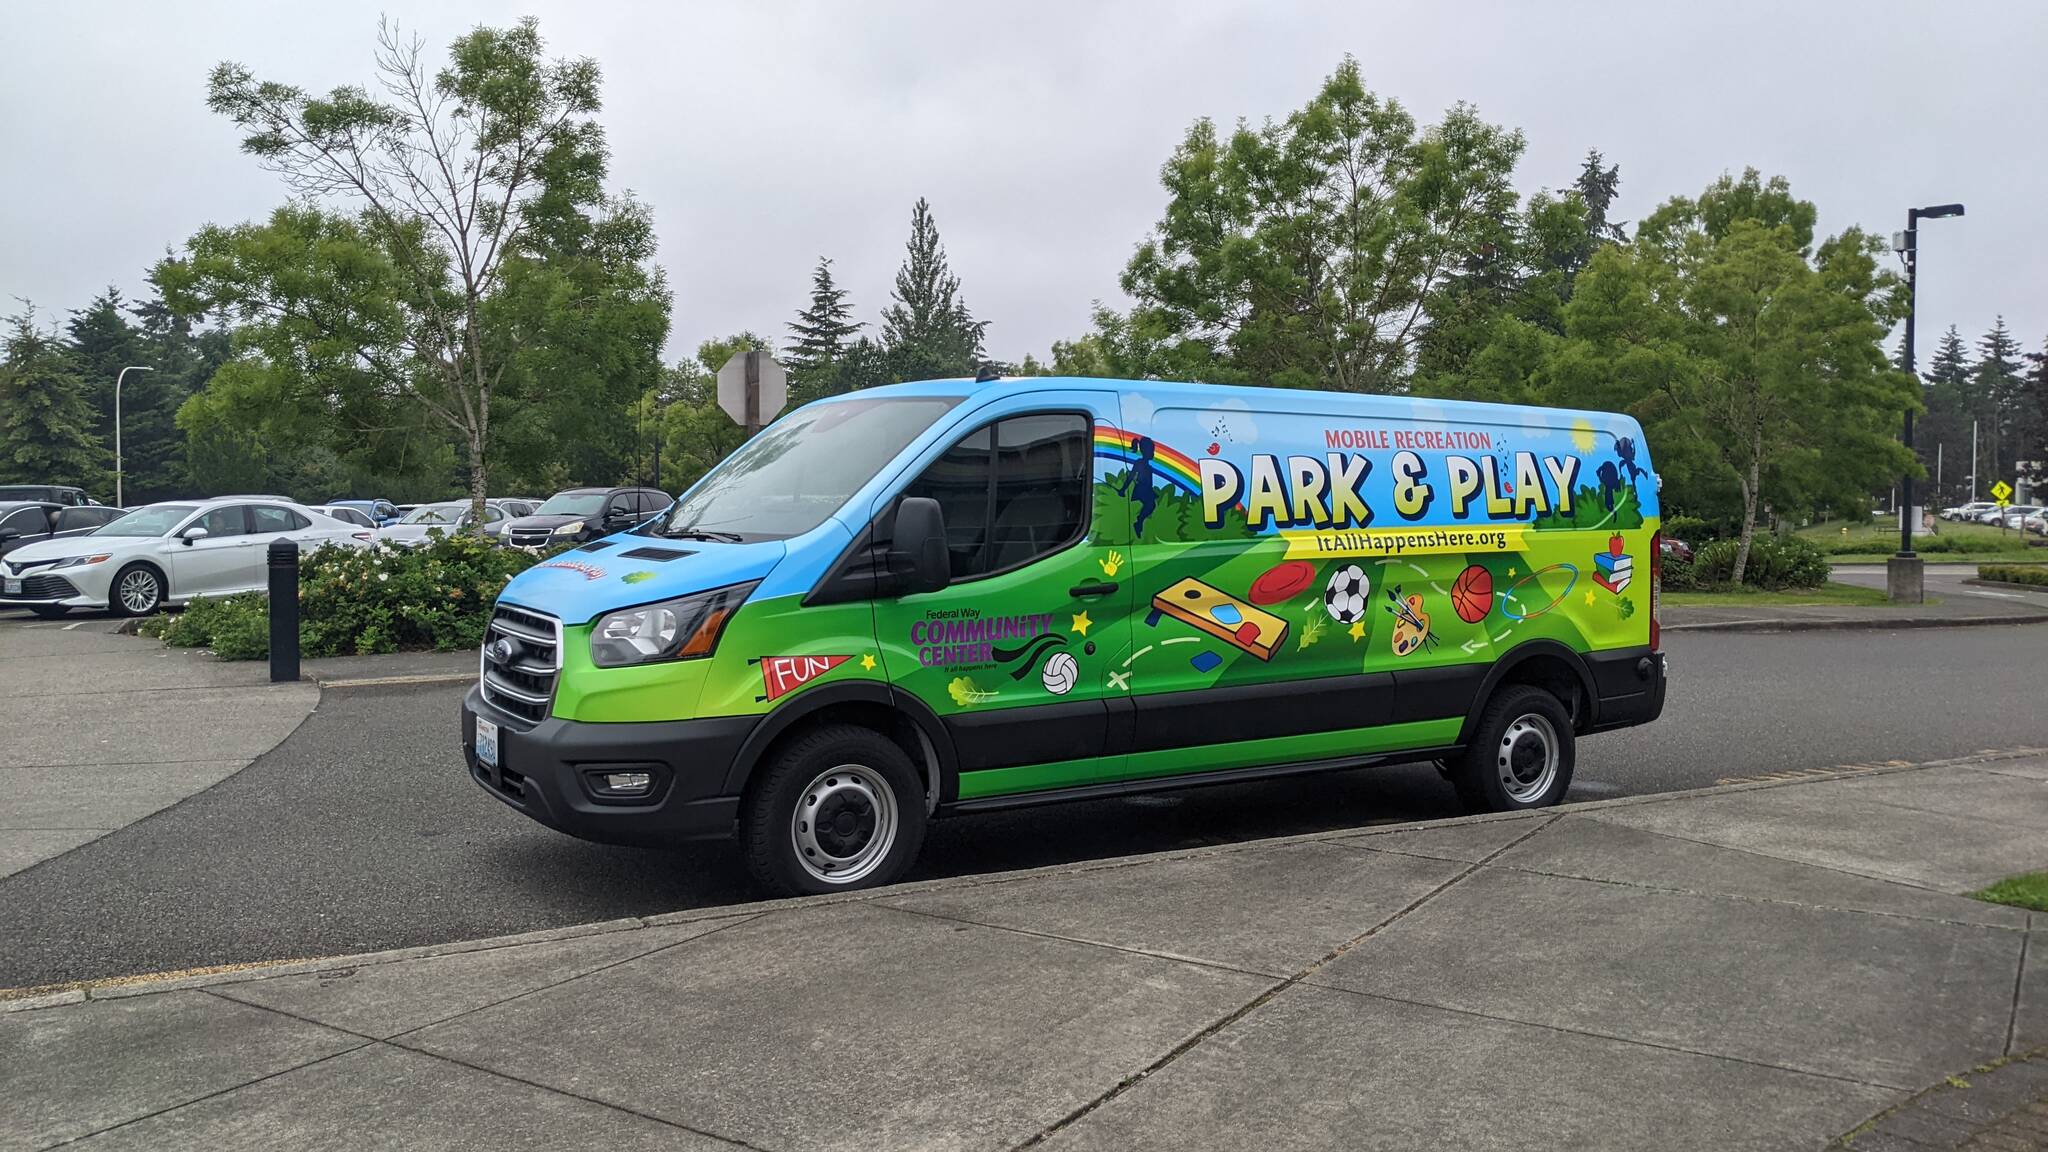 Newly decorated Park and Play van outside the Federal Way Community Center on June 6, 2022. Photo credit: Sarah Fox